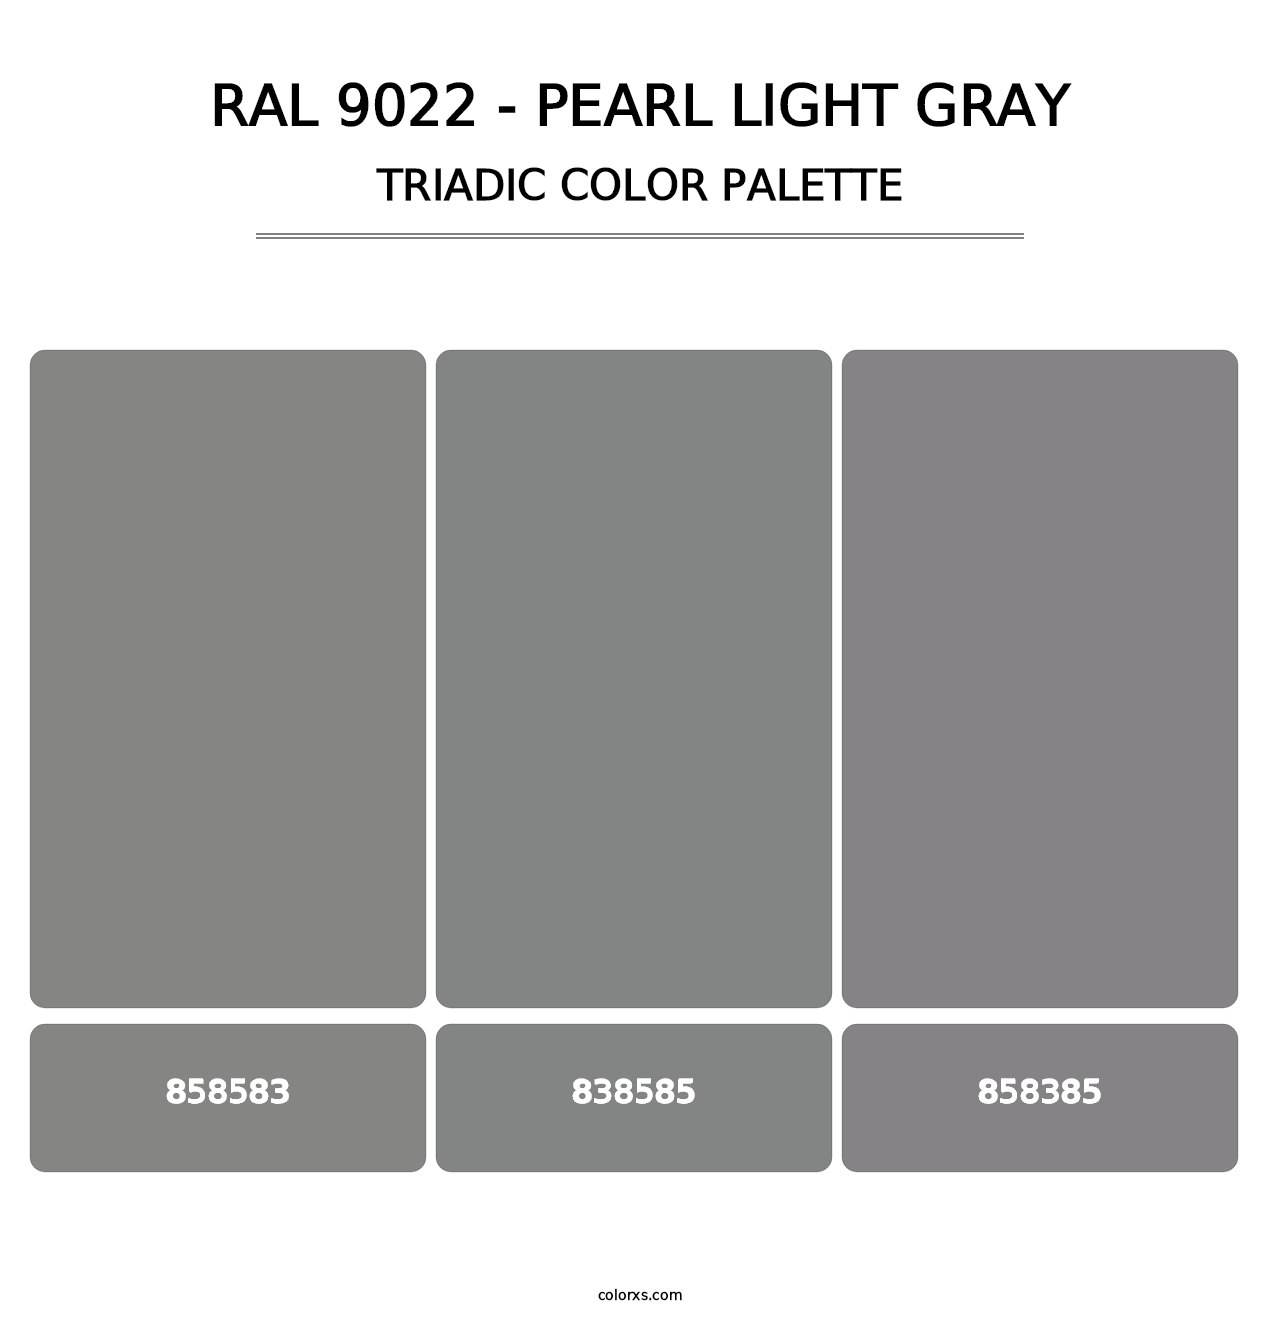 RAL 9022 - Pearl Light Gray - Triadic Color Palette